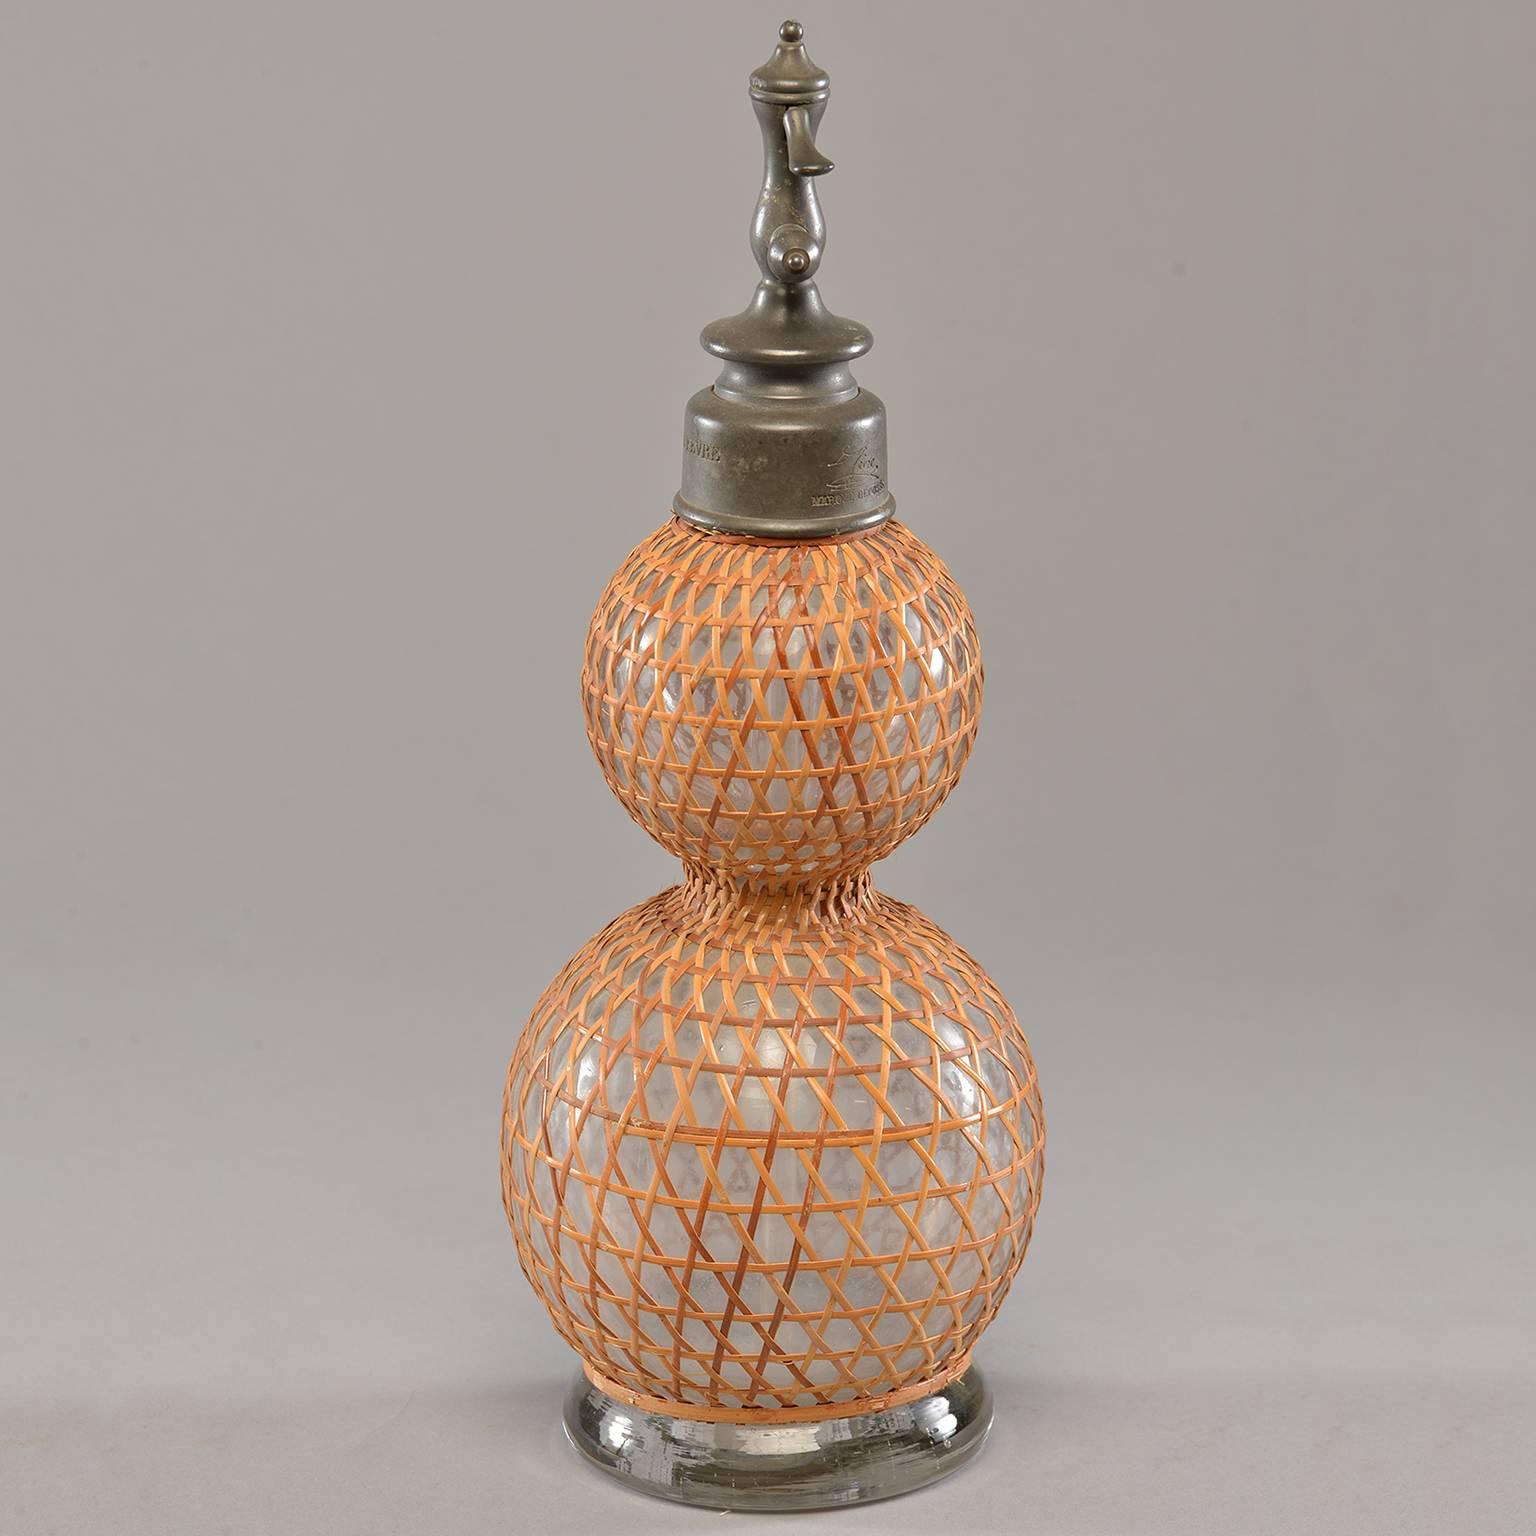 French double globe syphon bottle with pewter spout features hand woven rattan cover in classic caning pattern. Excellent antique condition, circa 1910.